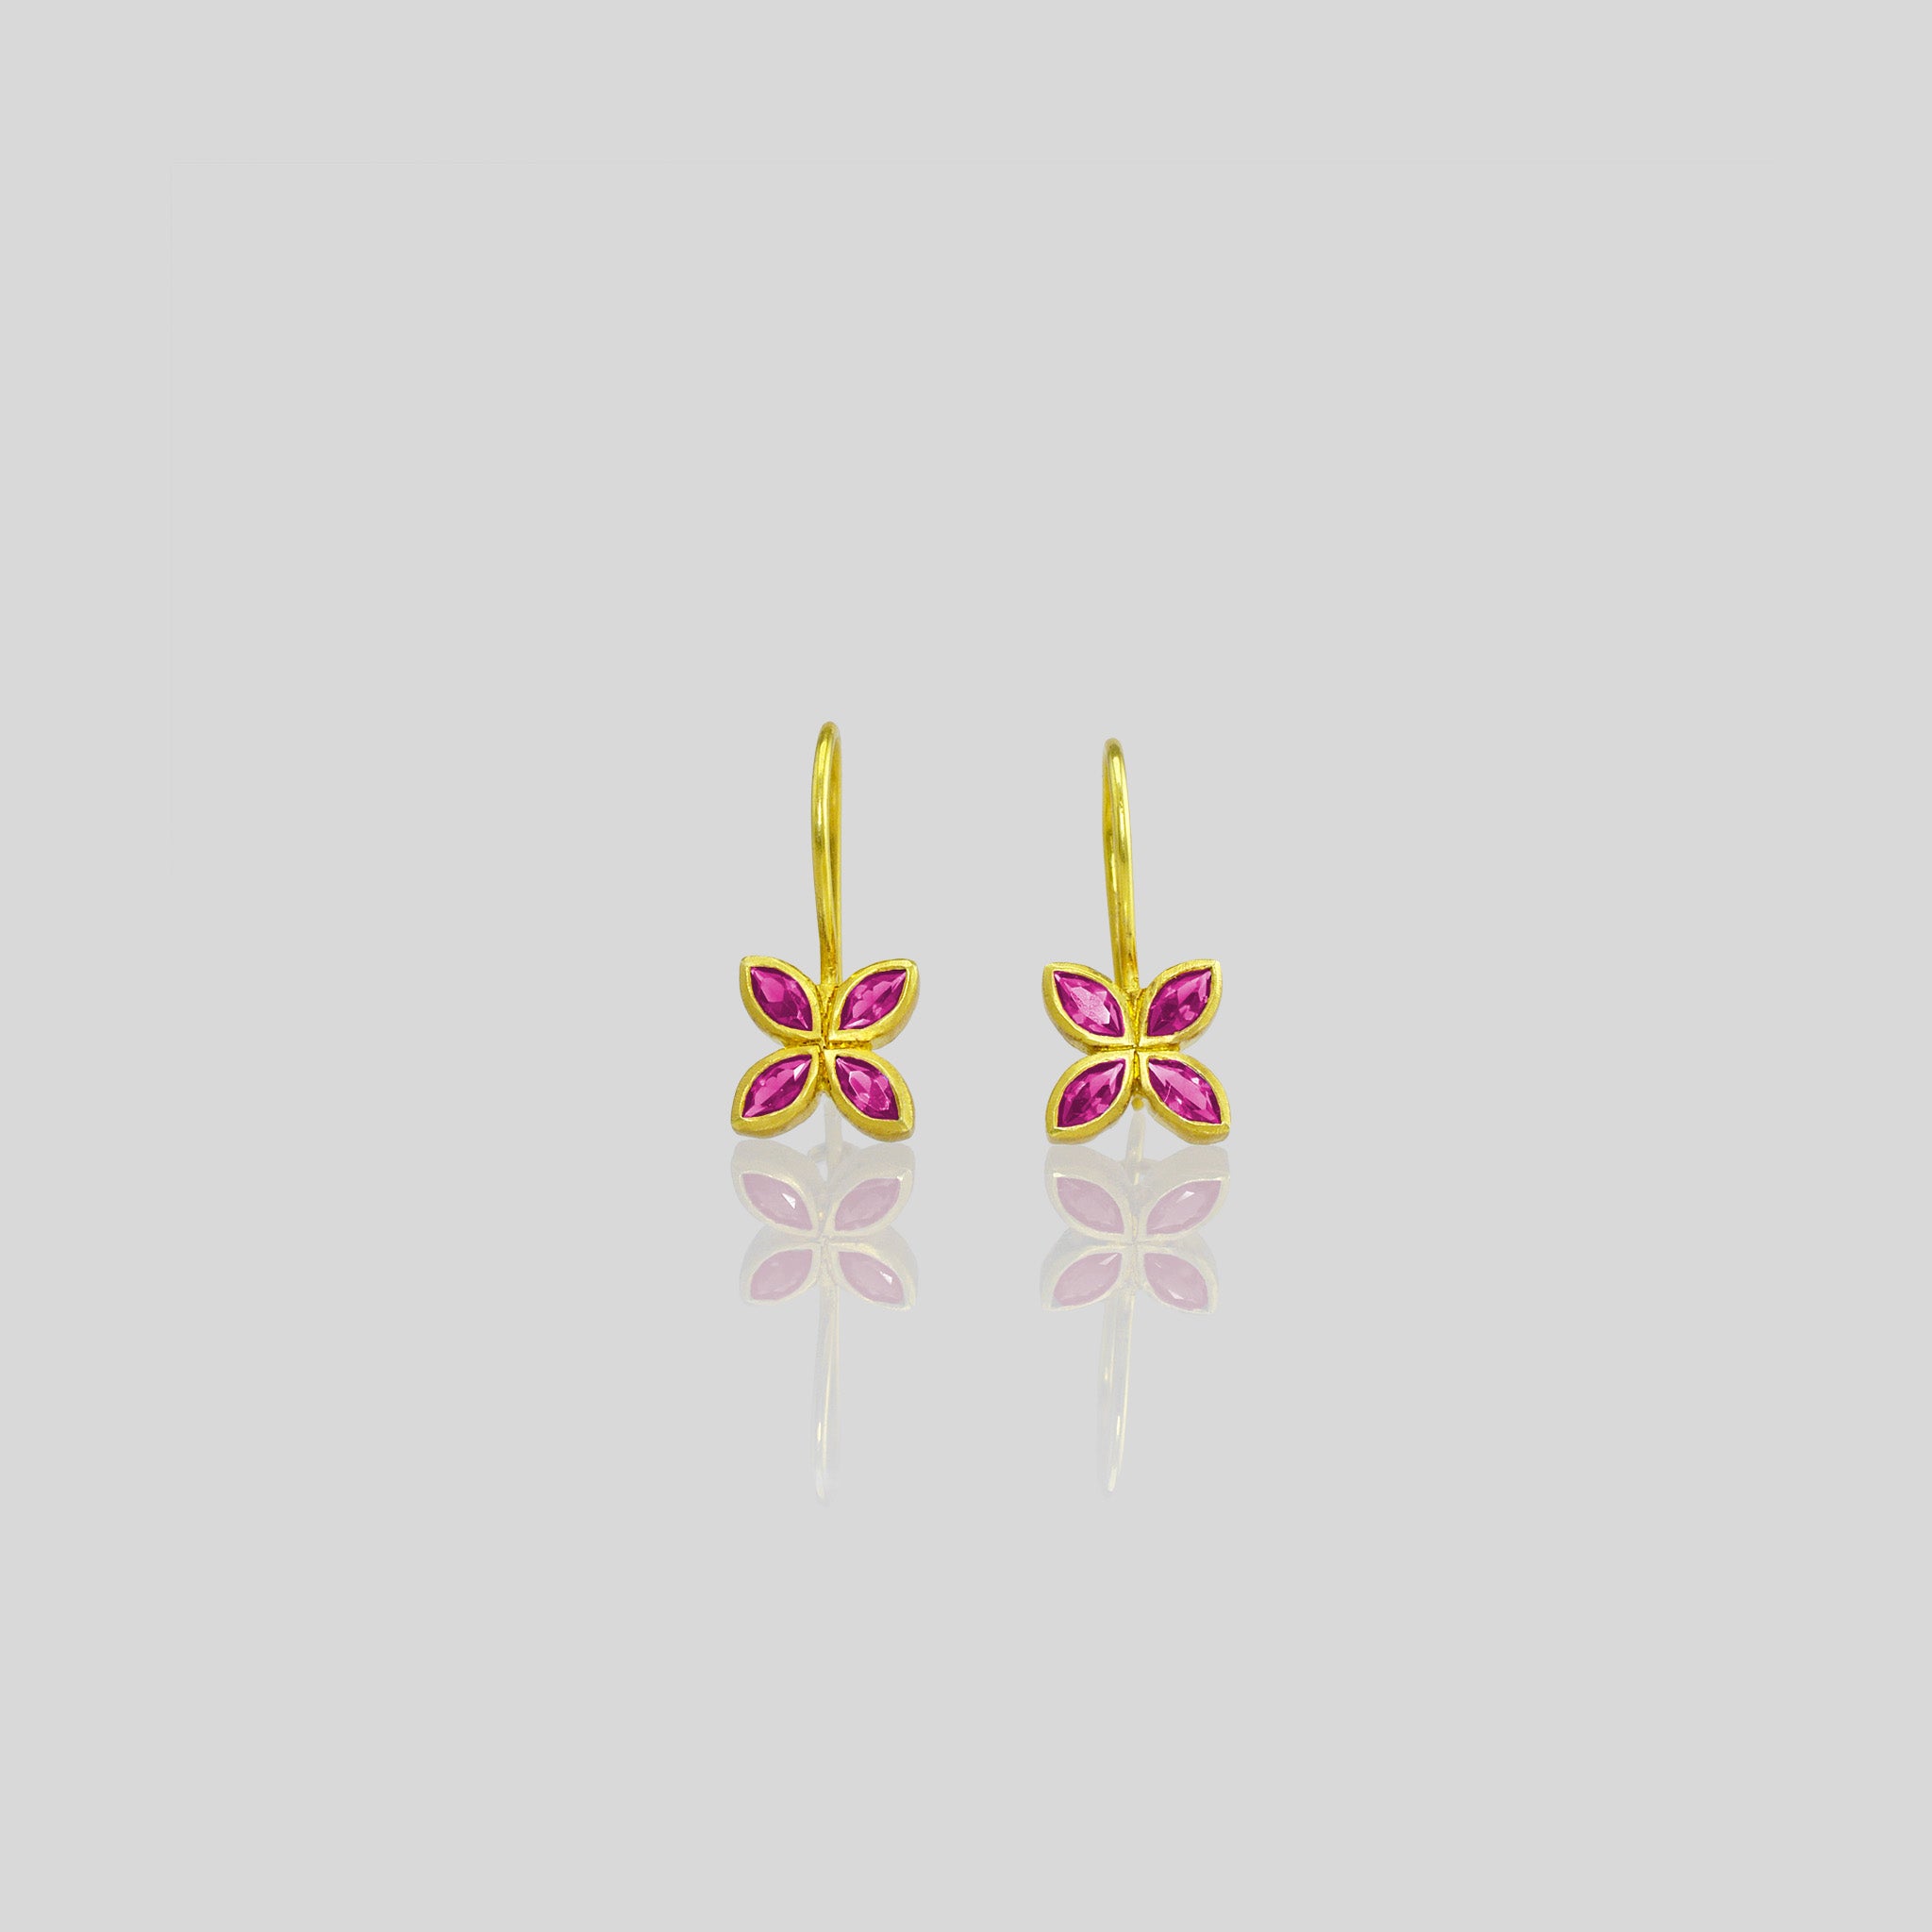 Dazzling Ruby flower earrings, crafted from 4 marquise gemstones. Lightweight, colorful and vibrant.